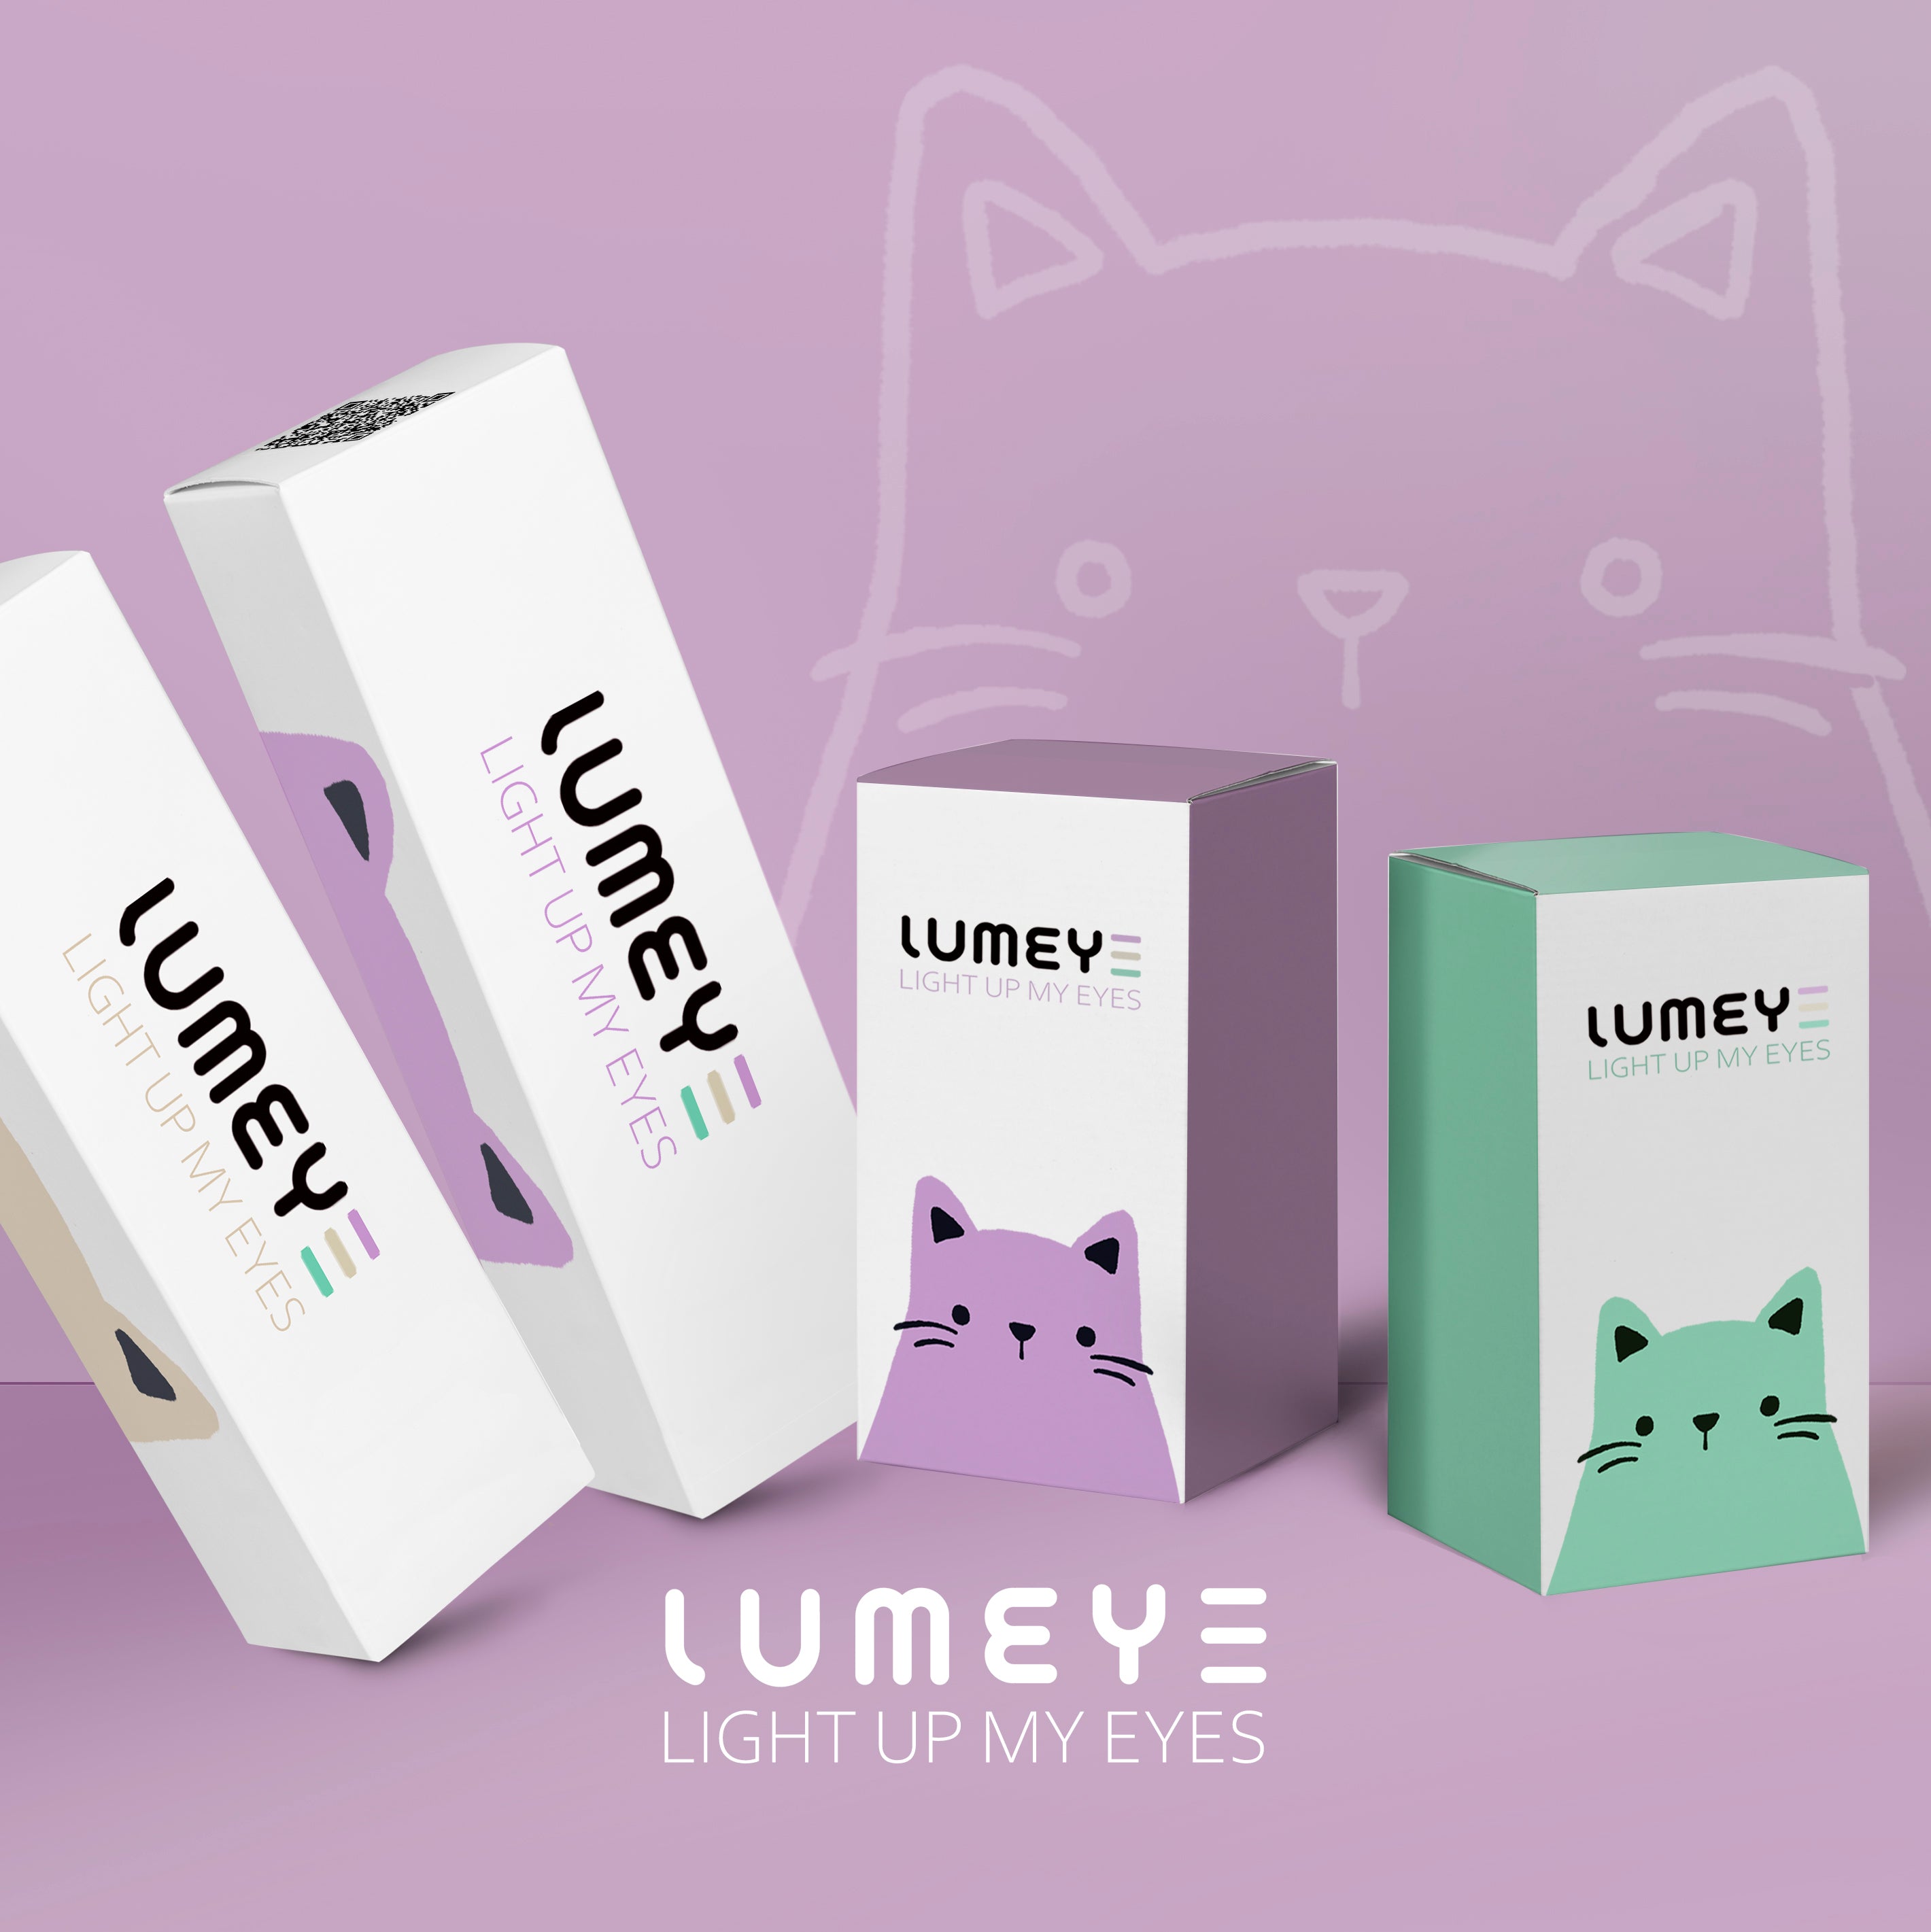 Best COLORED CONTACTS - LUMEYE Exotic Green Colored Contact Lenses - LUMEYE